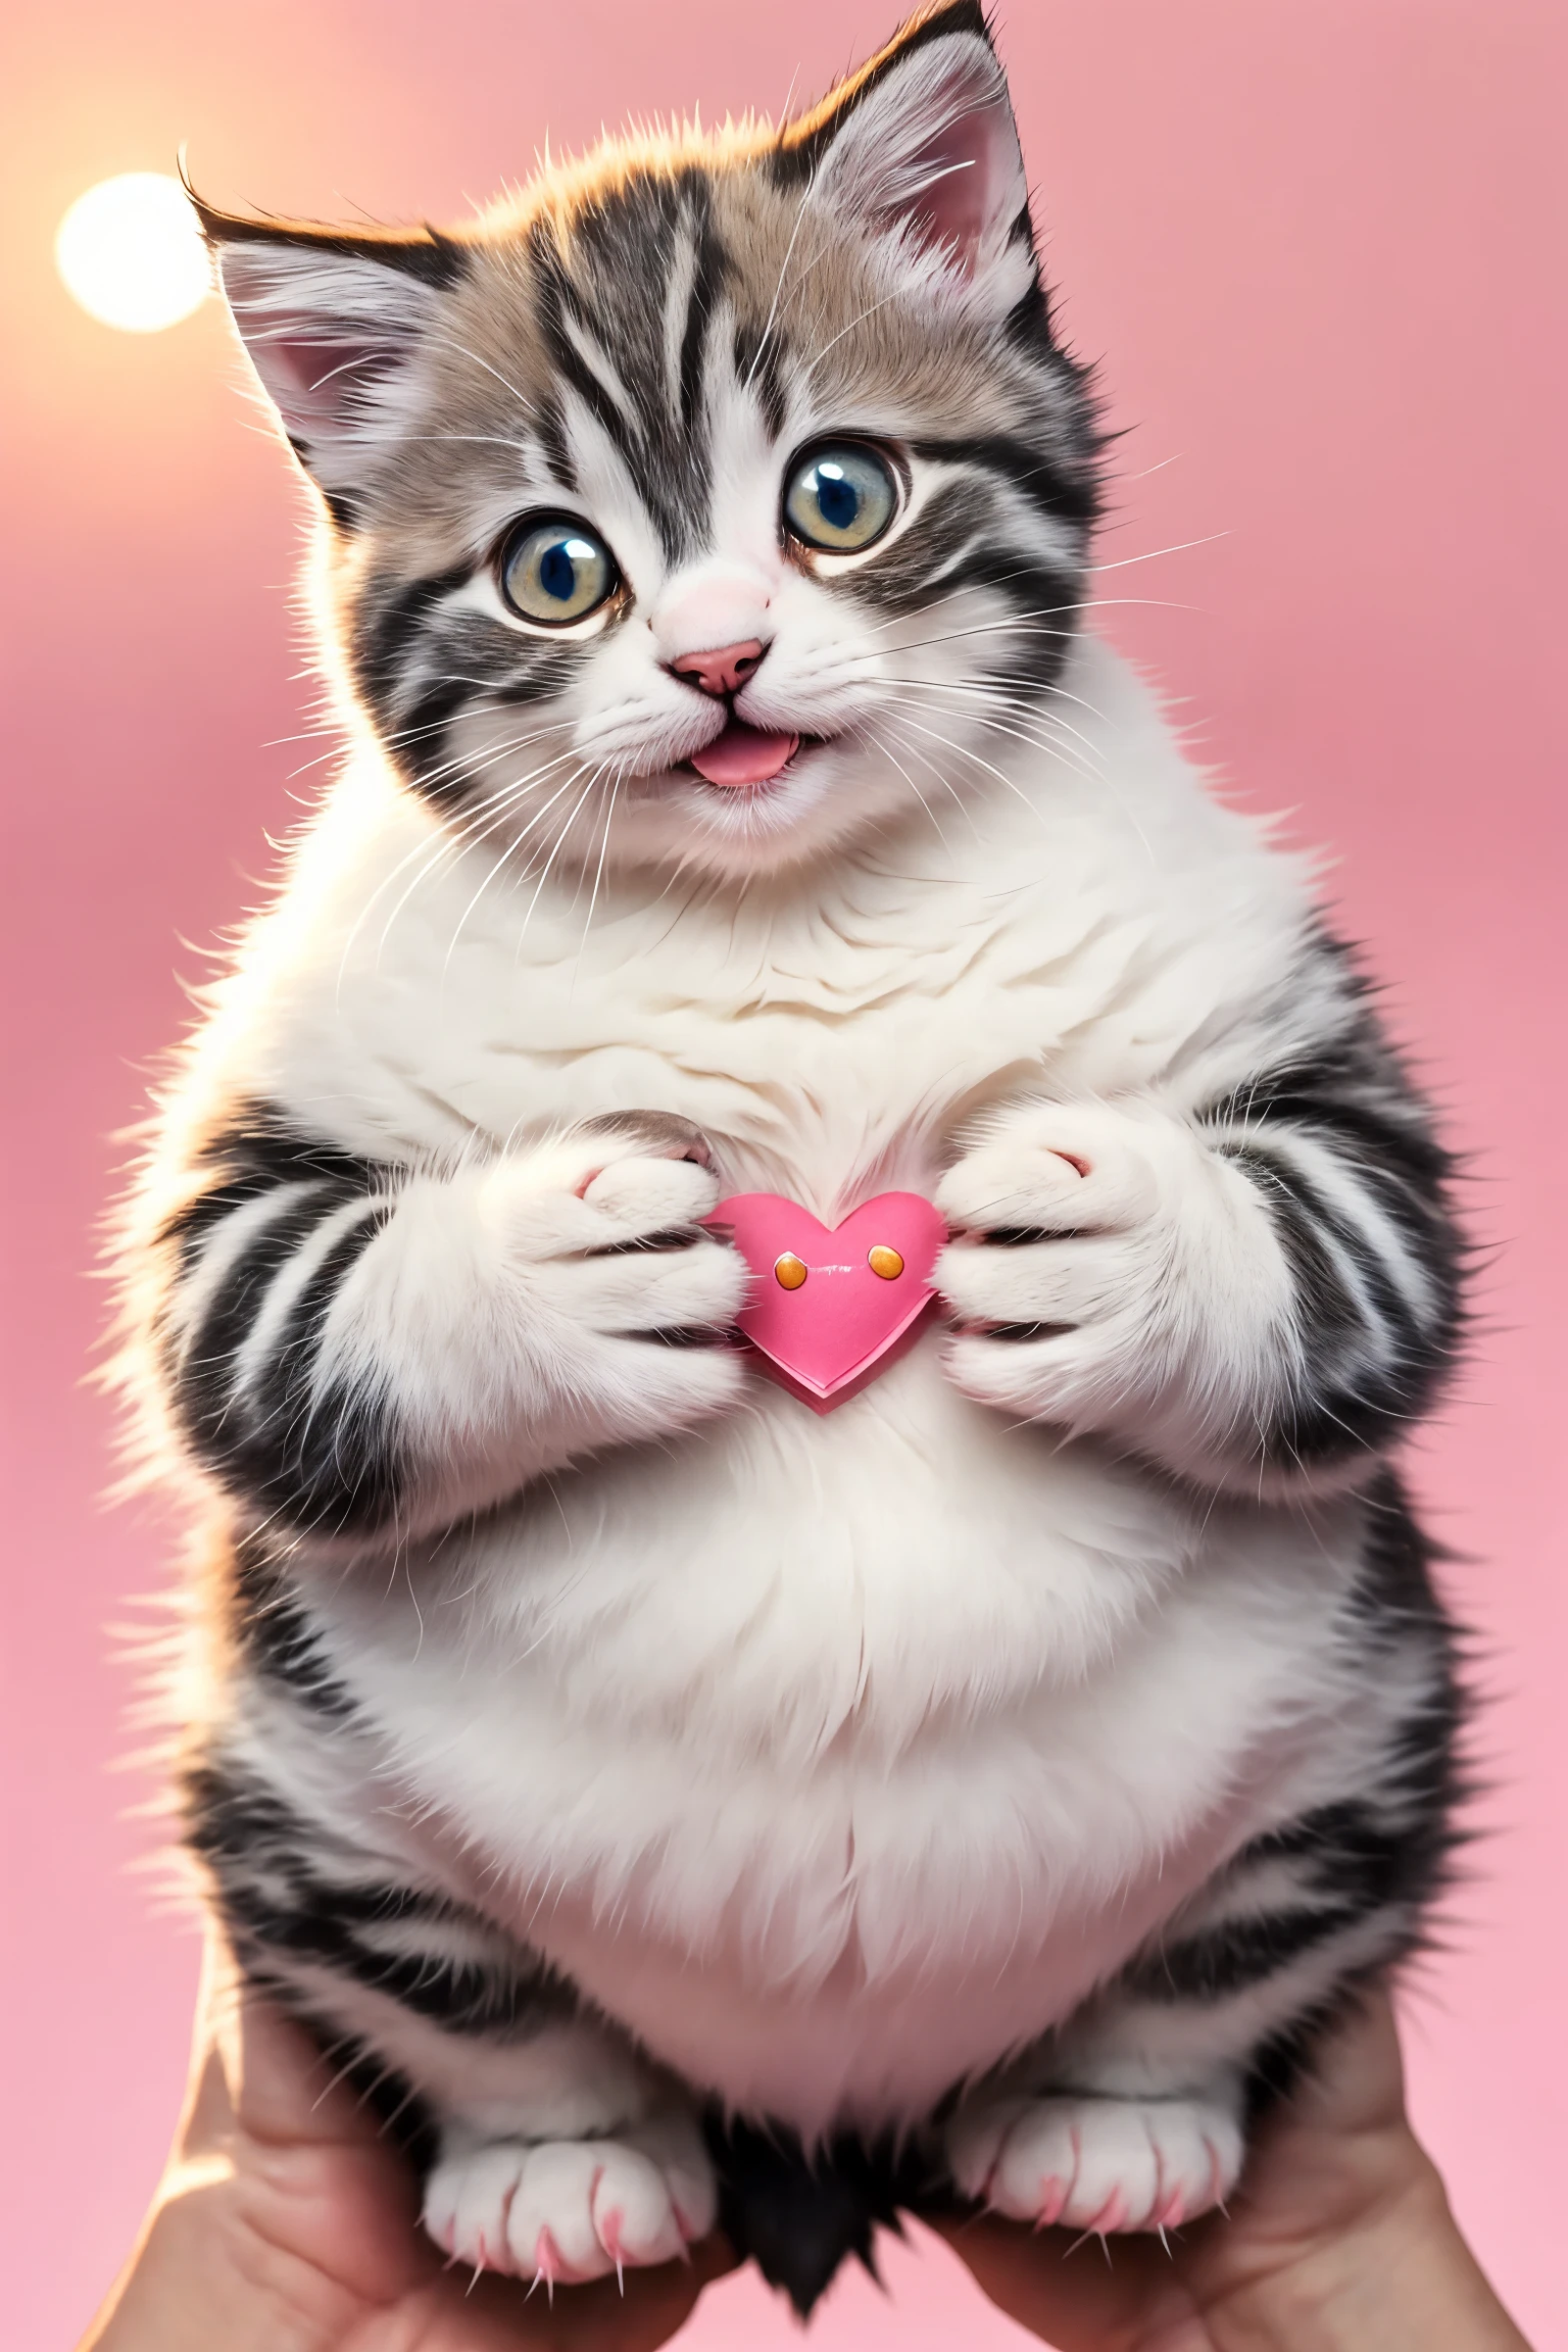 a small, simple, cuddly felt fat kitten holding a fish in its tiny hands, gazing directly into the camera with a joyful sm...